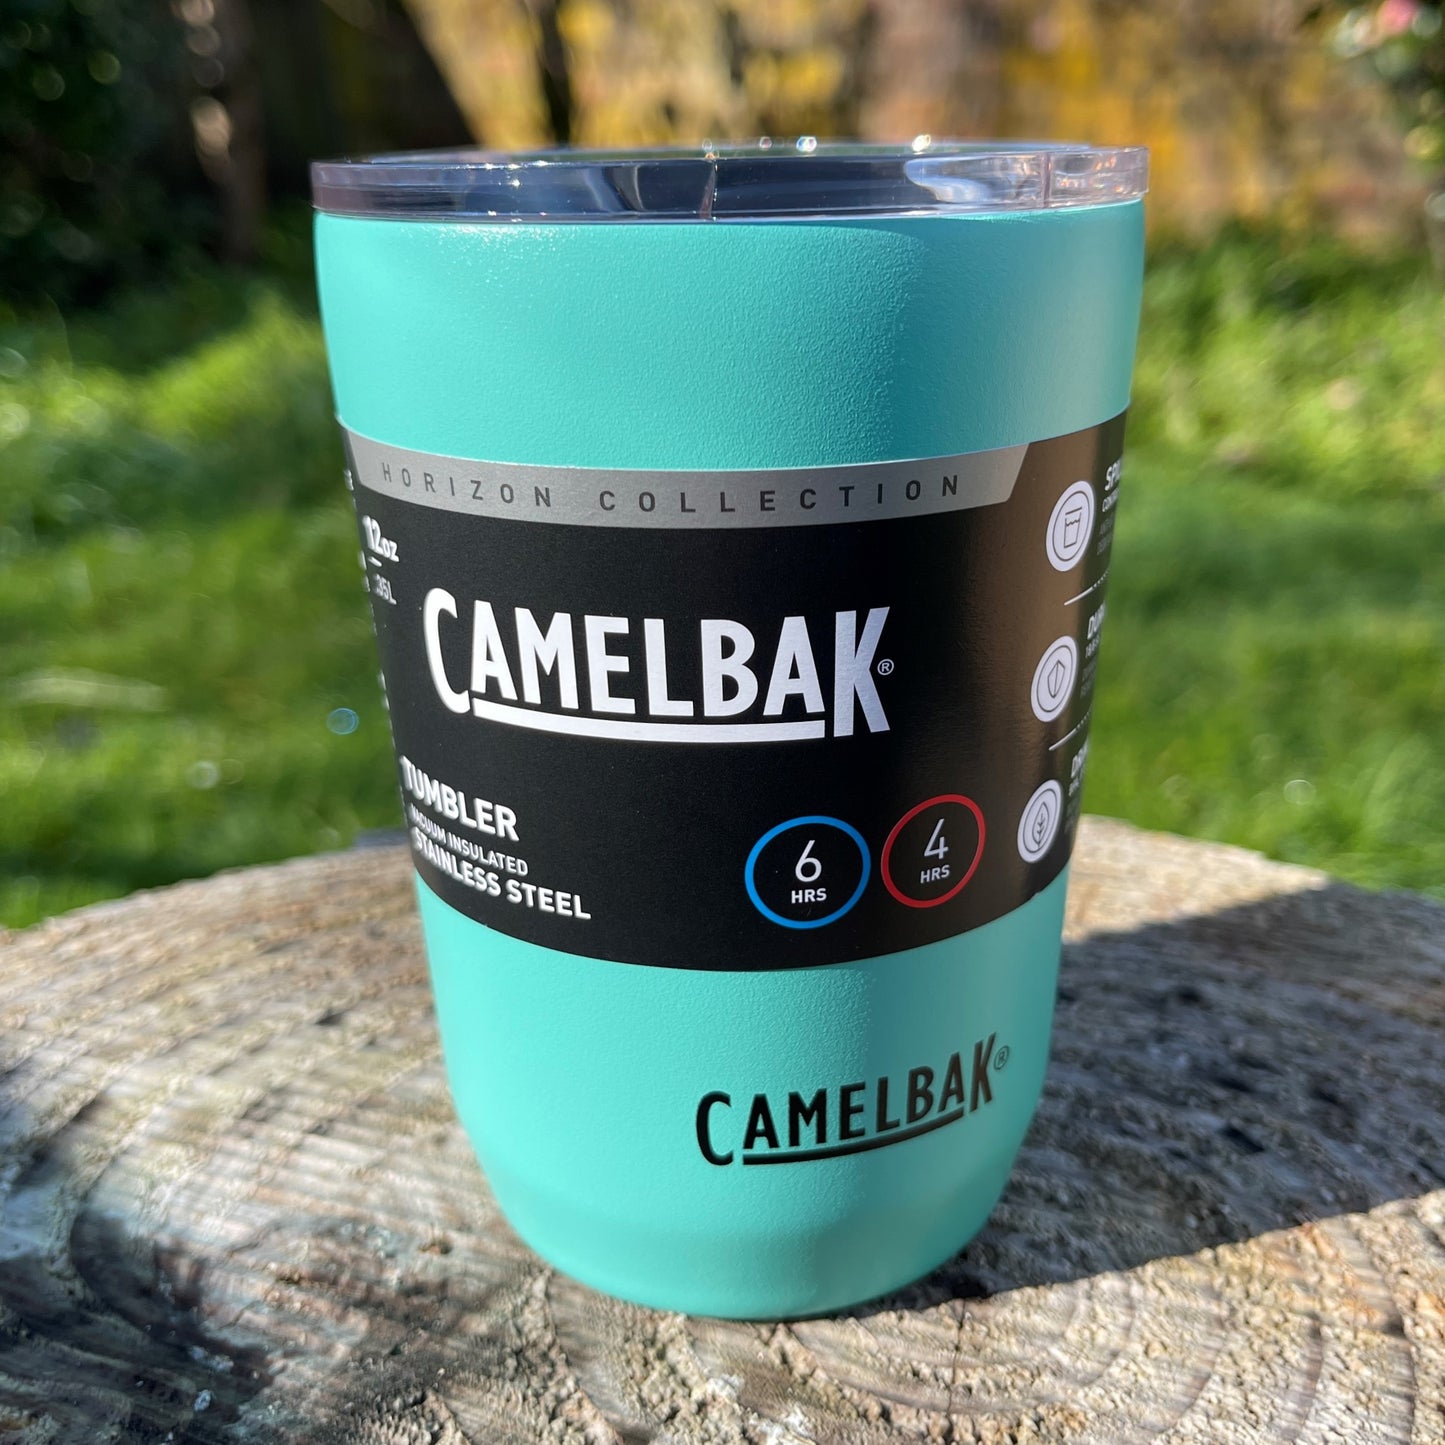 Stainless steel coffee tumbler from Camelbak in blue coastal colour.